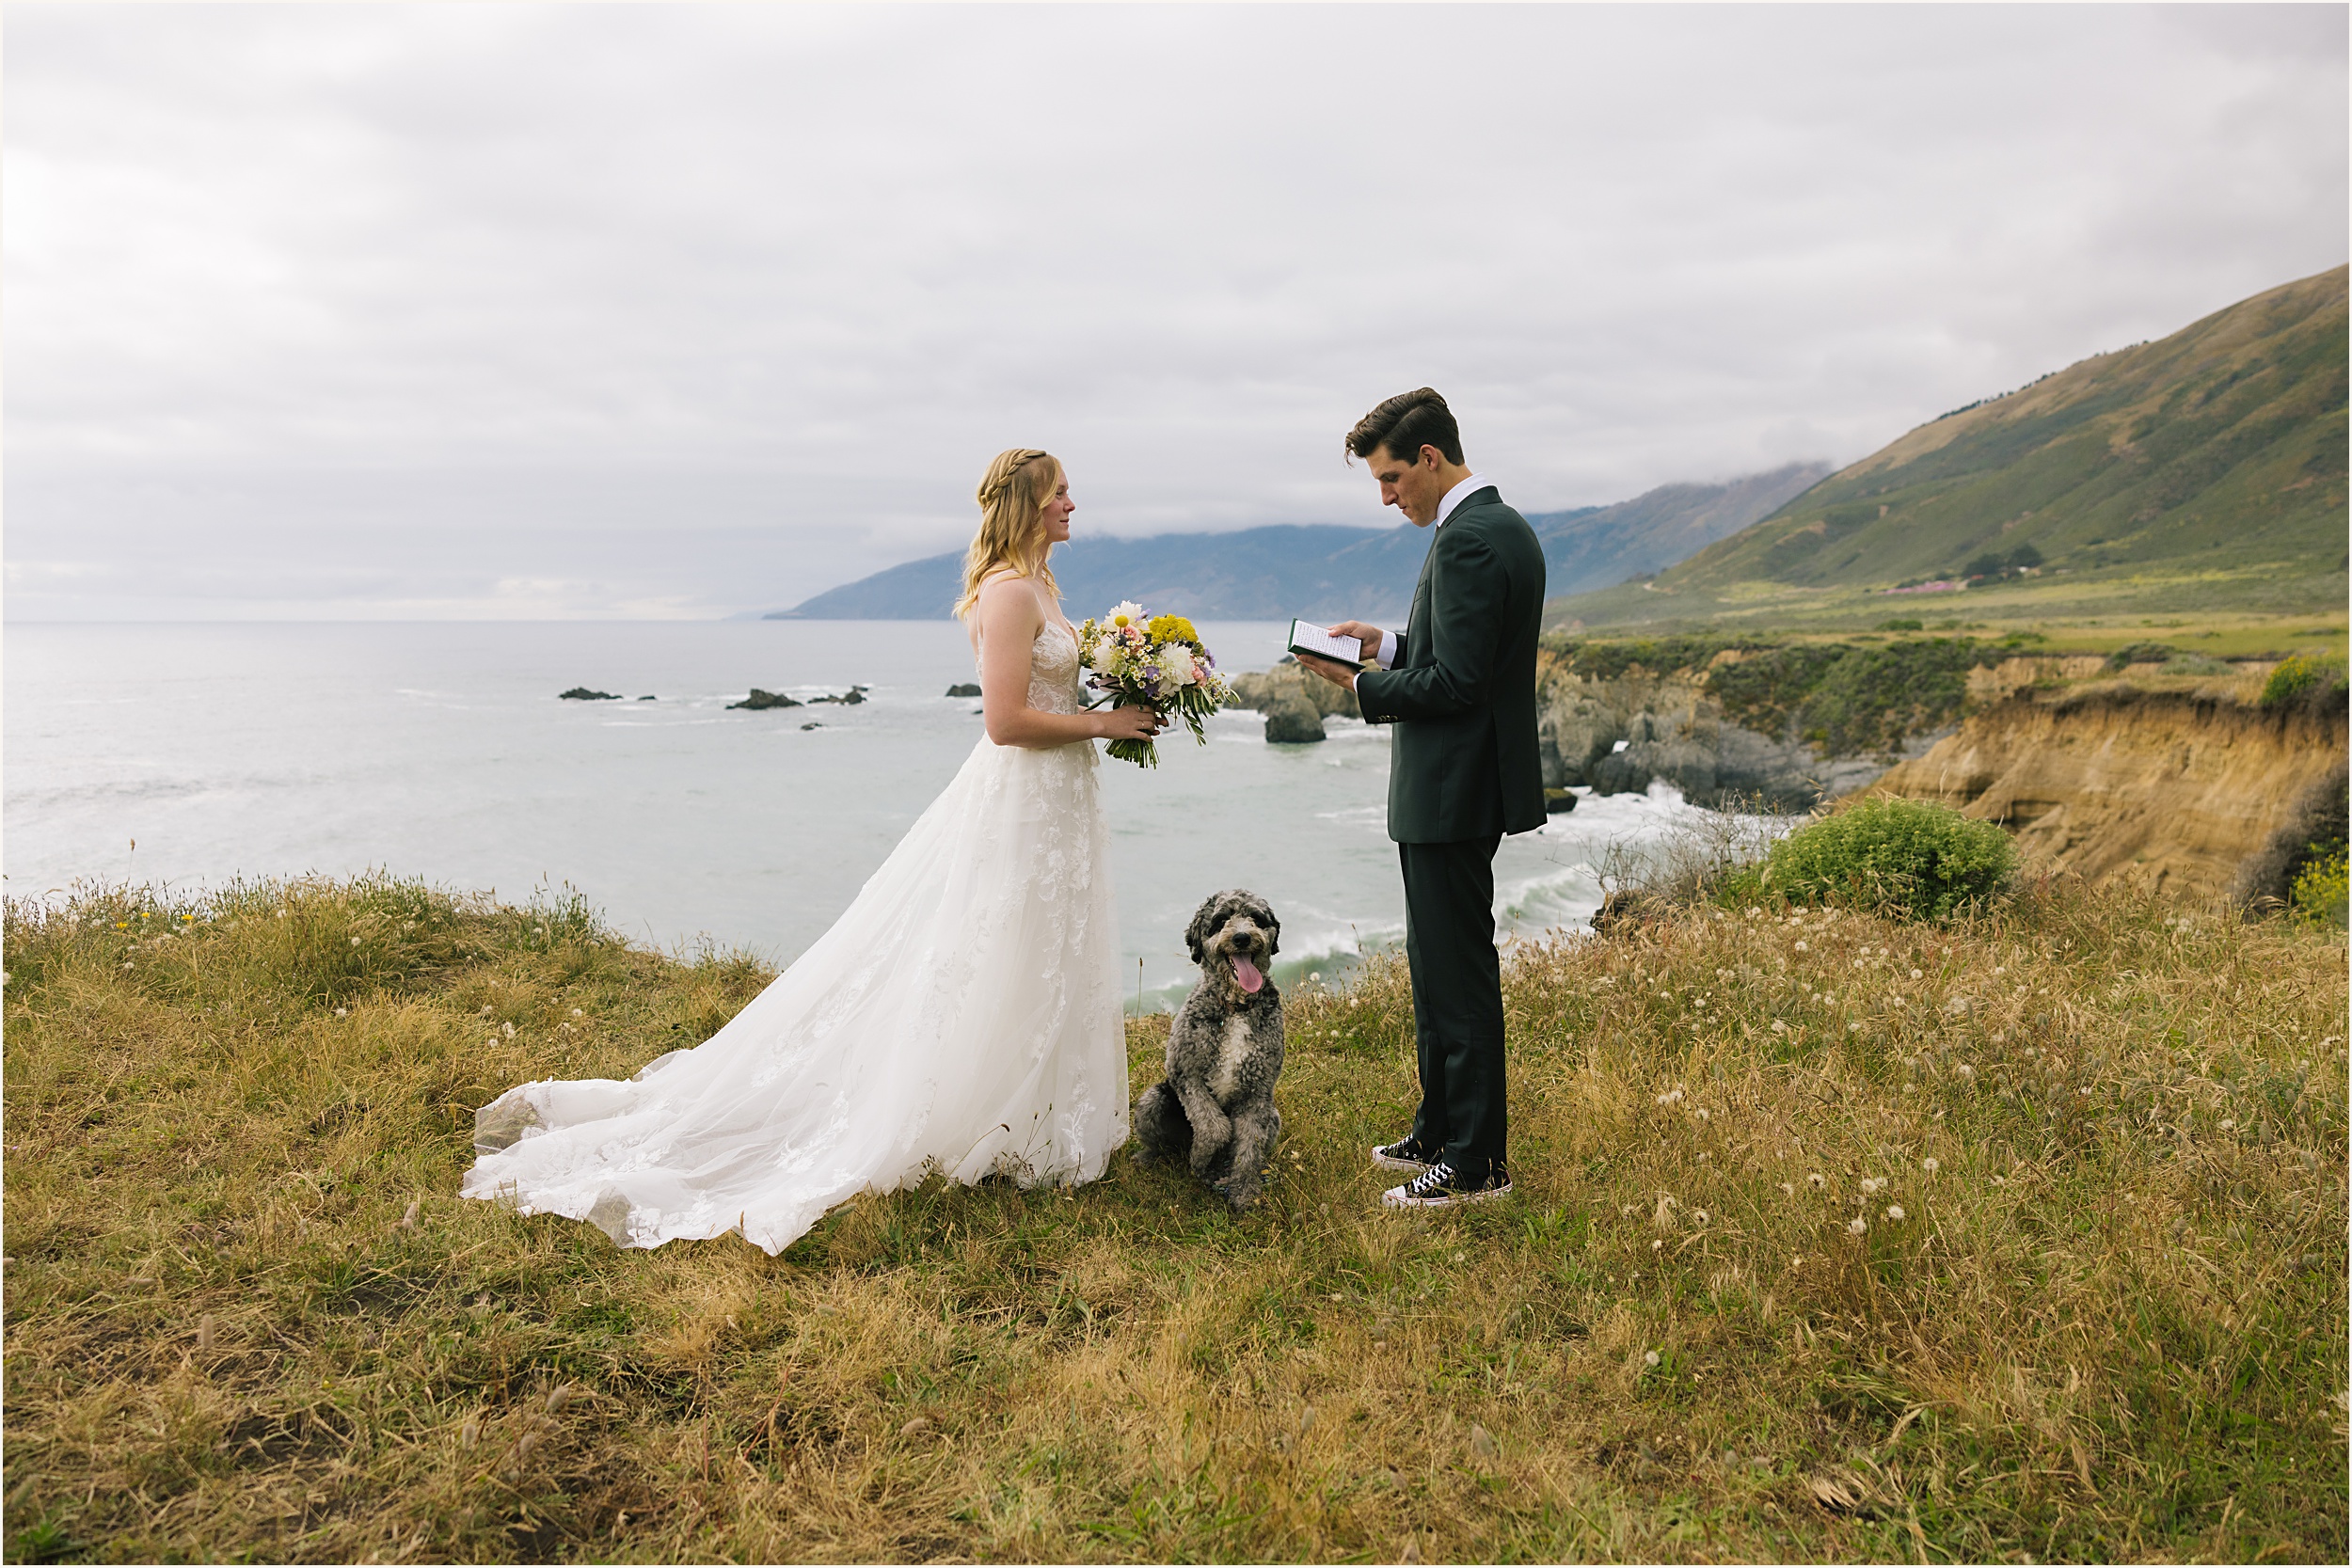 Emma-and-Chase-110-1 Cliffside Elopement in Big Sur // Emma & Chase